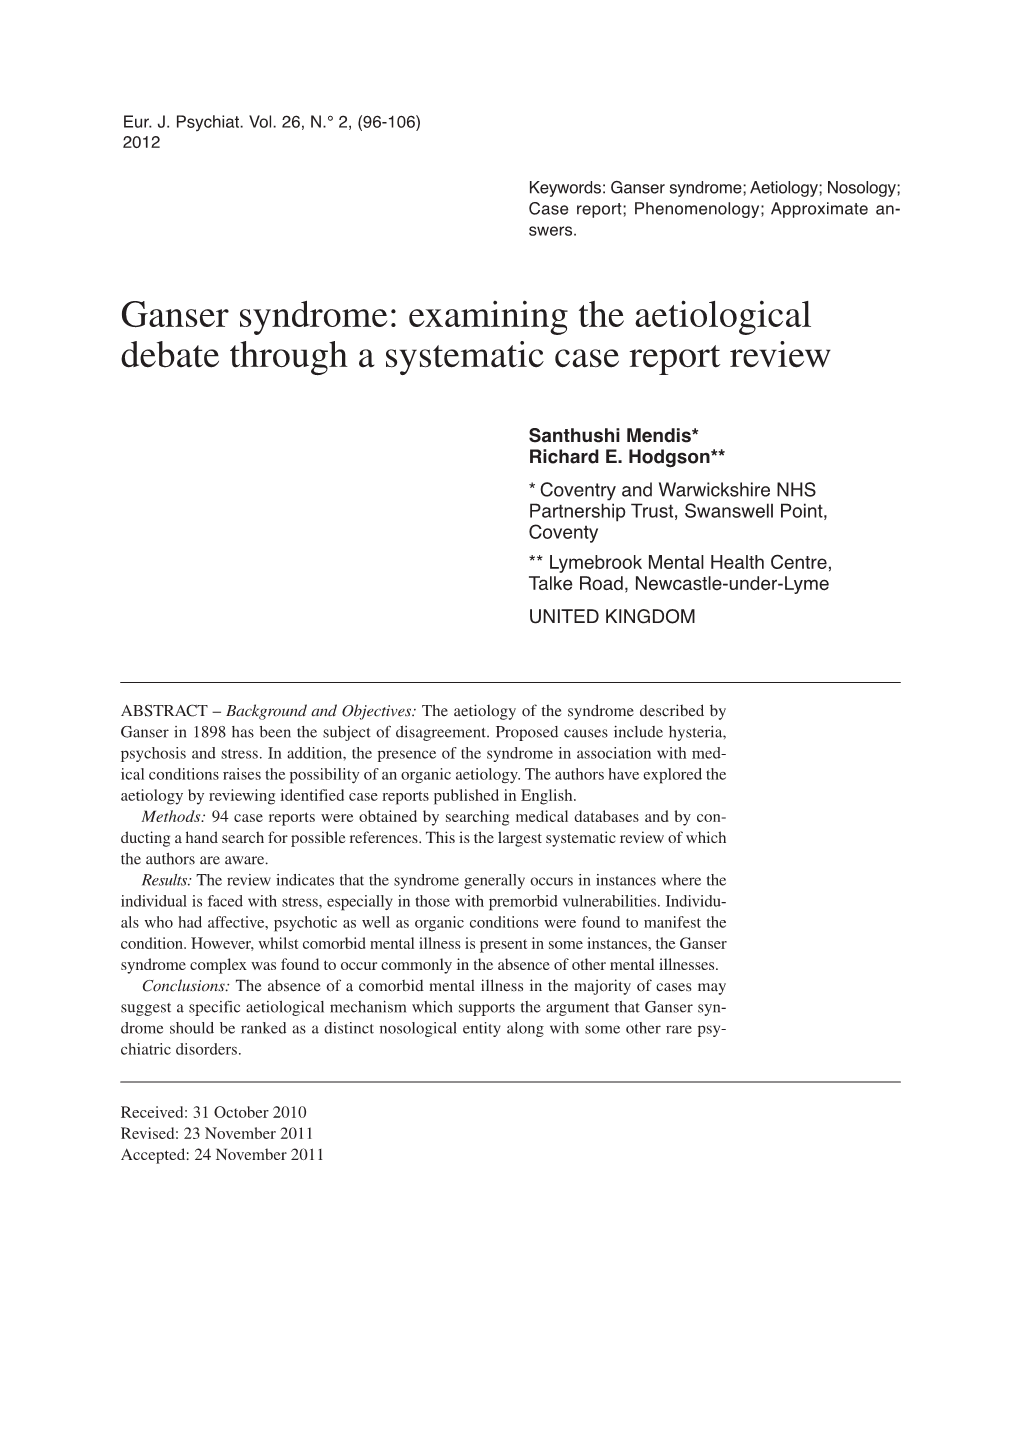 Ganser Syndrome: Examining the Aetiological Debate Through a Systematic Case Report Review